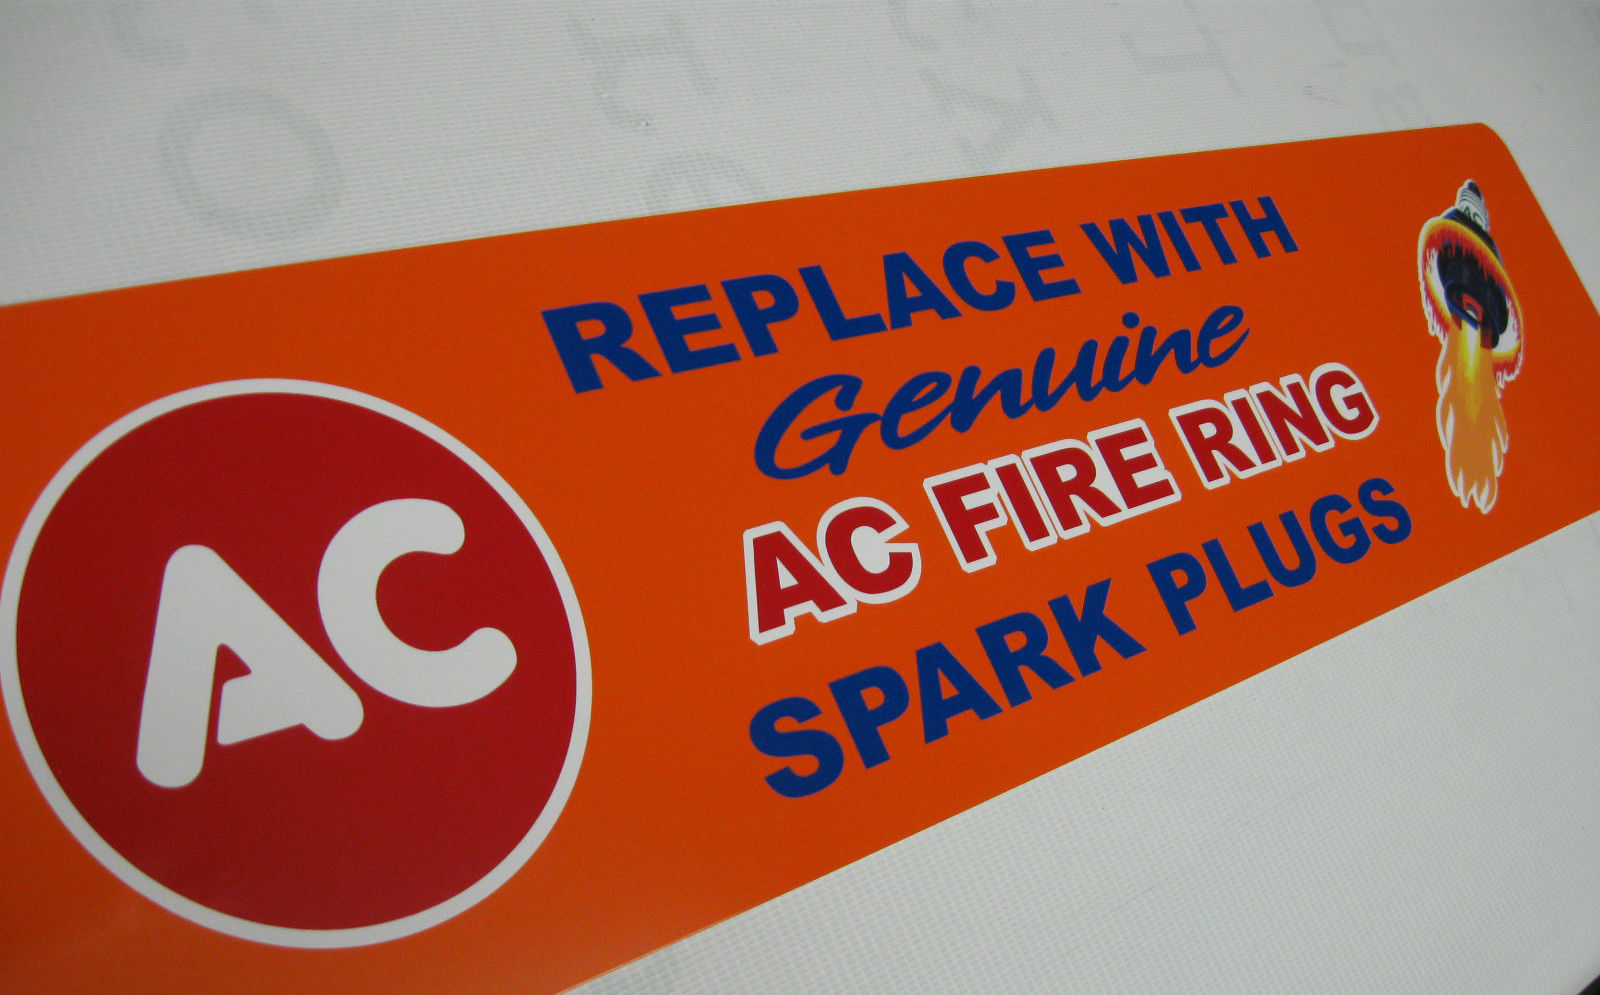 vintage-genuine-ac-delco-fire-ring-spark-plugs-6x24-metal-sign